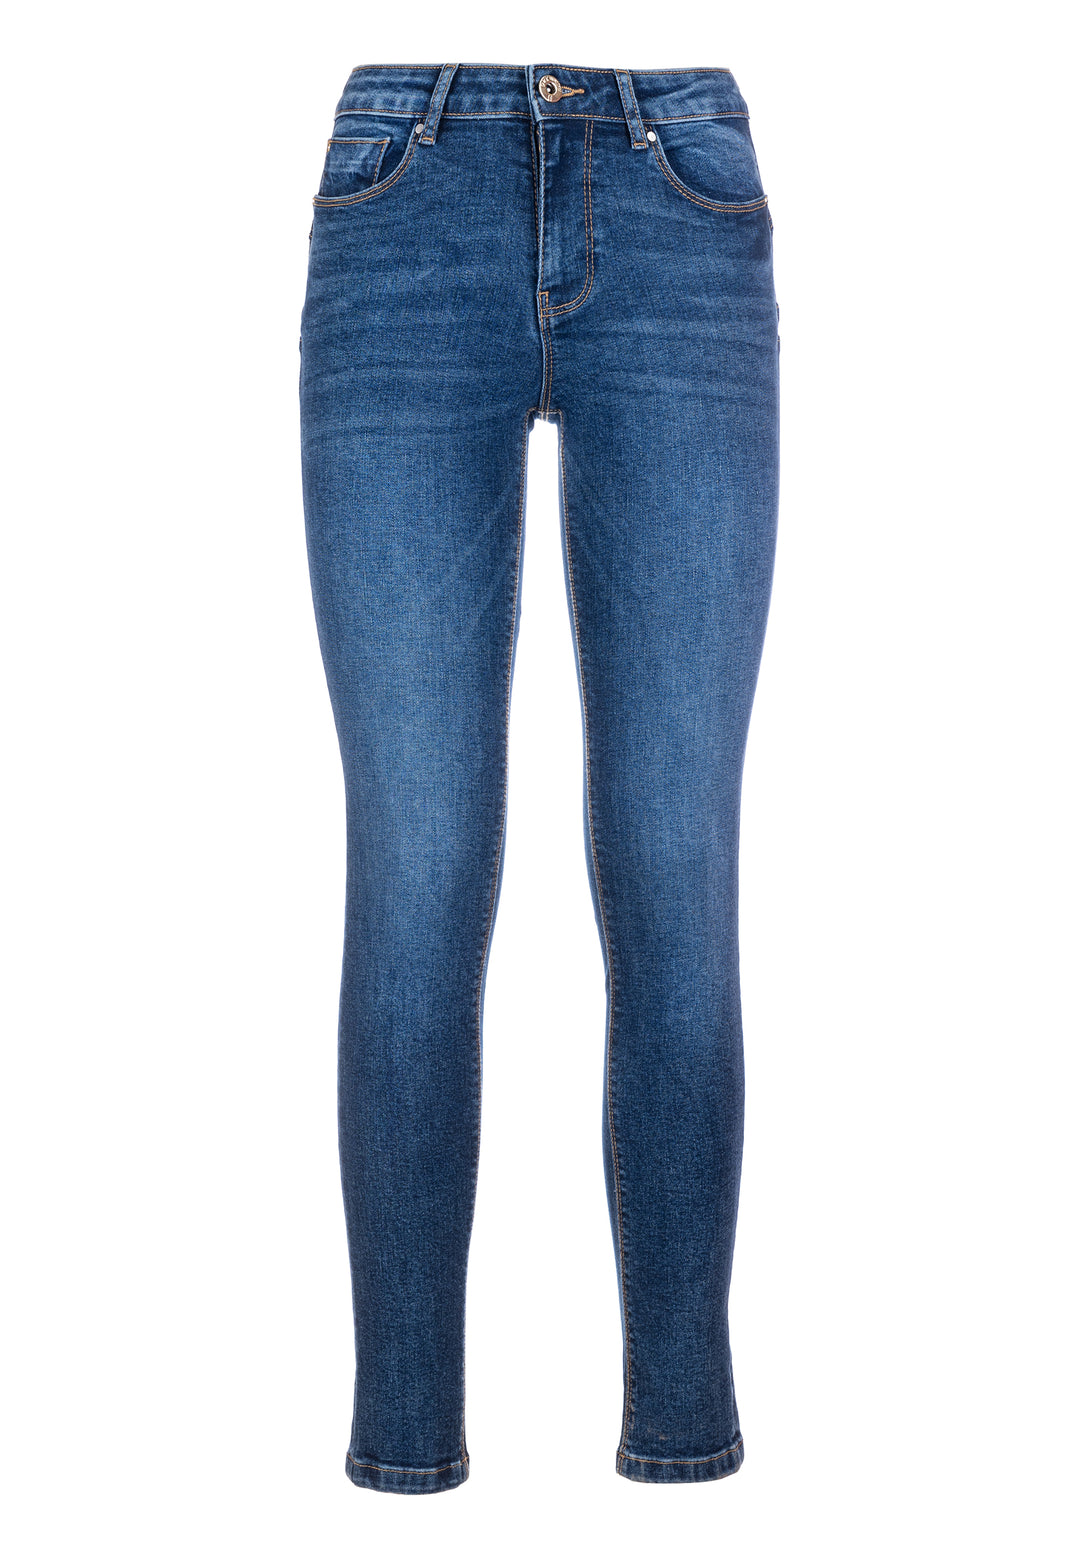 Jeans slim fit push up effect made in denim with middle wash and stone